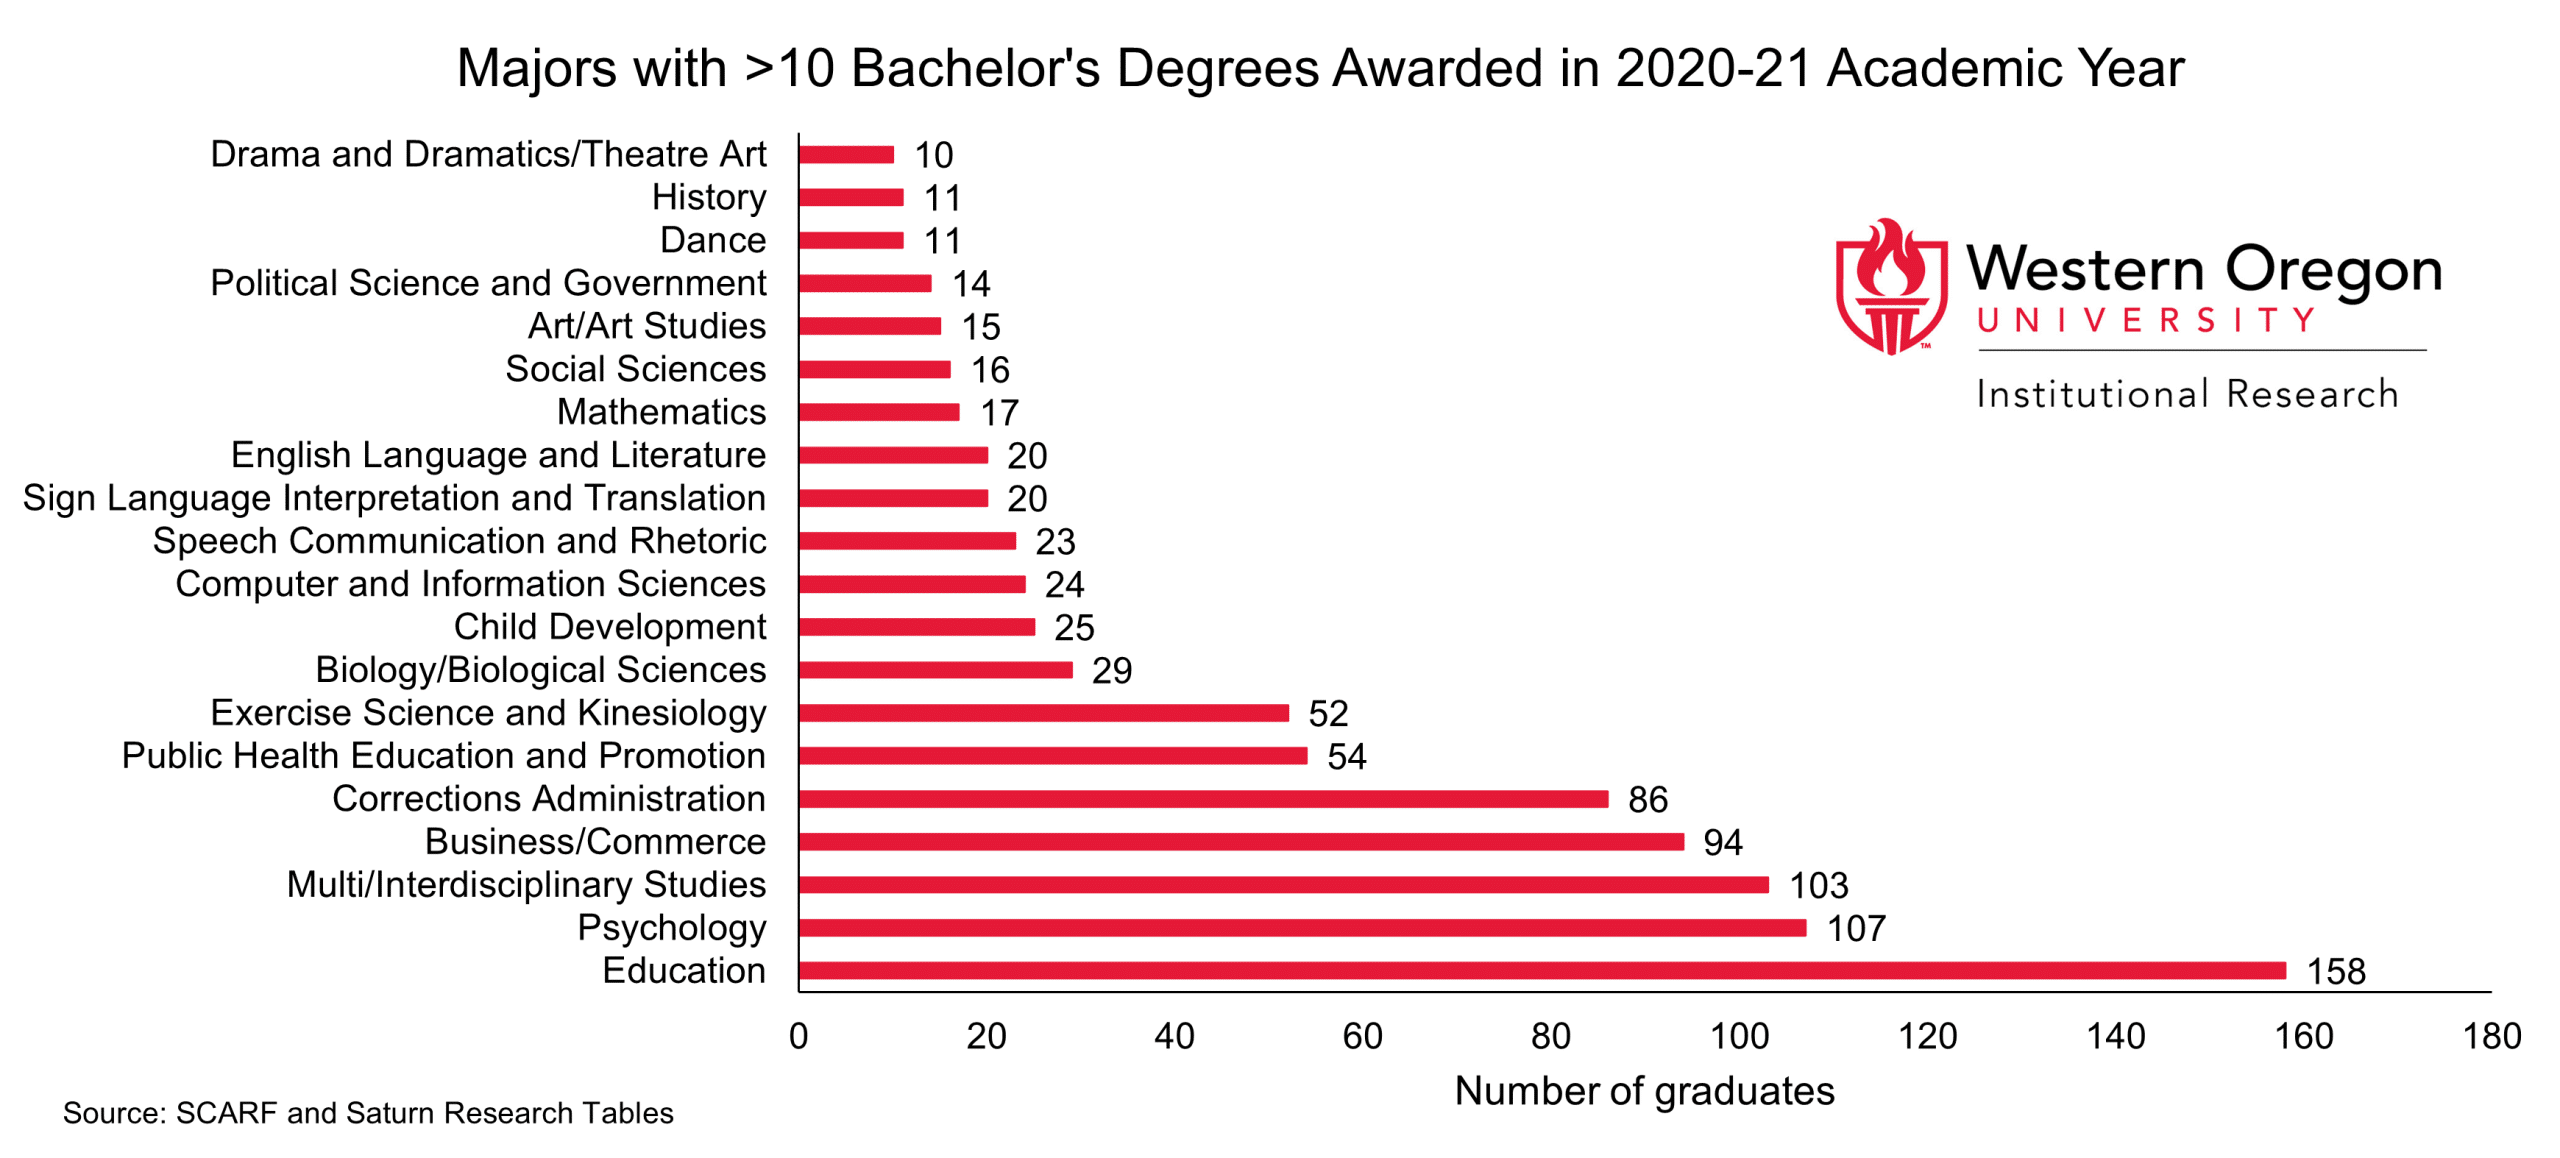 Majors with >10 graduates in 2021